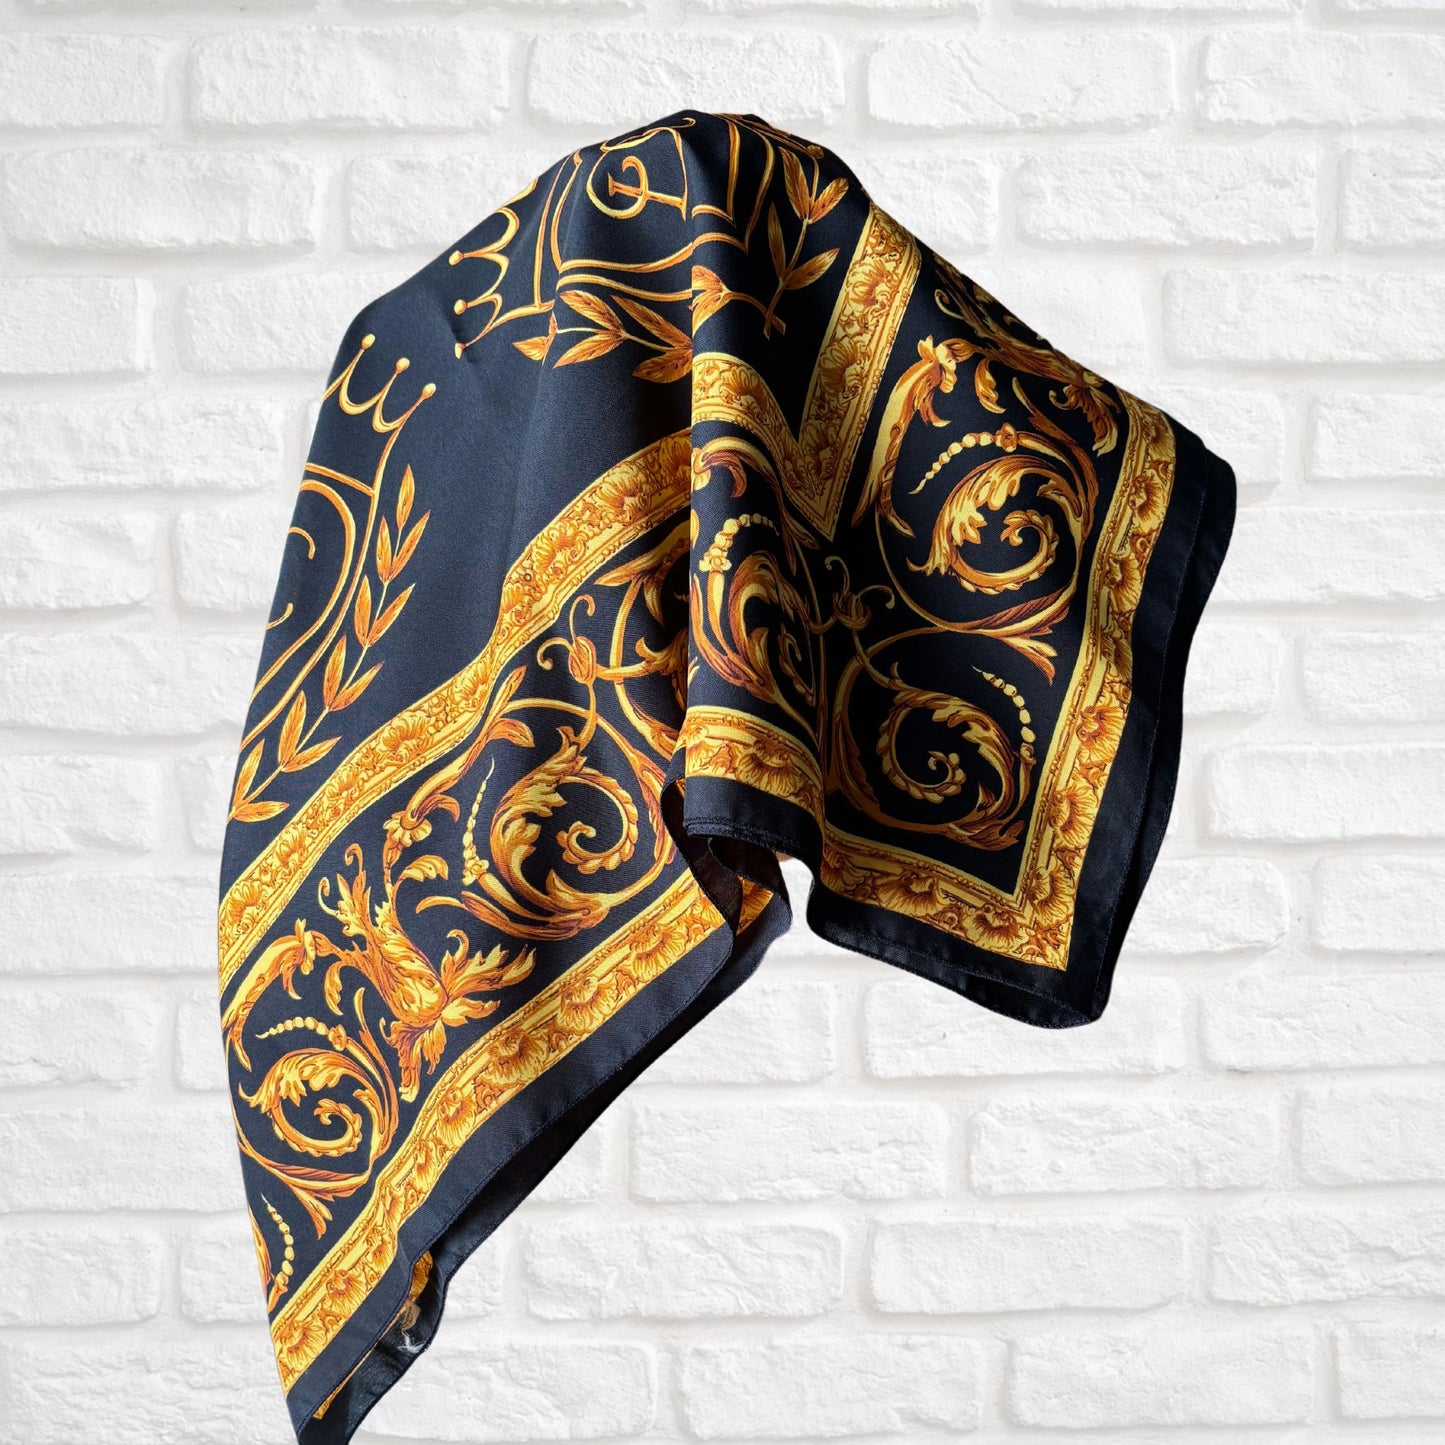 Black and Gold Baroque Style Large Square Vintage Scarf. Great Gift idea.